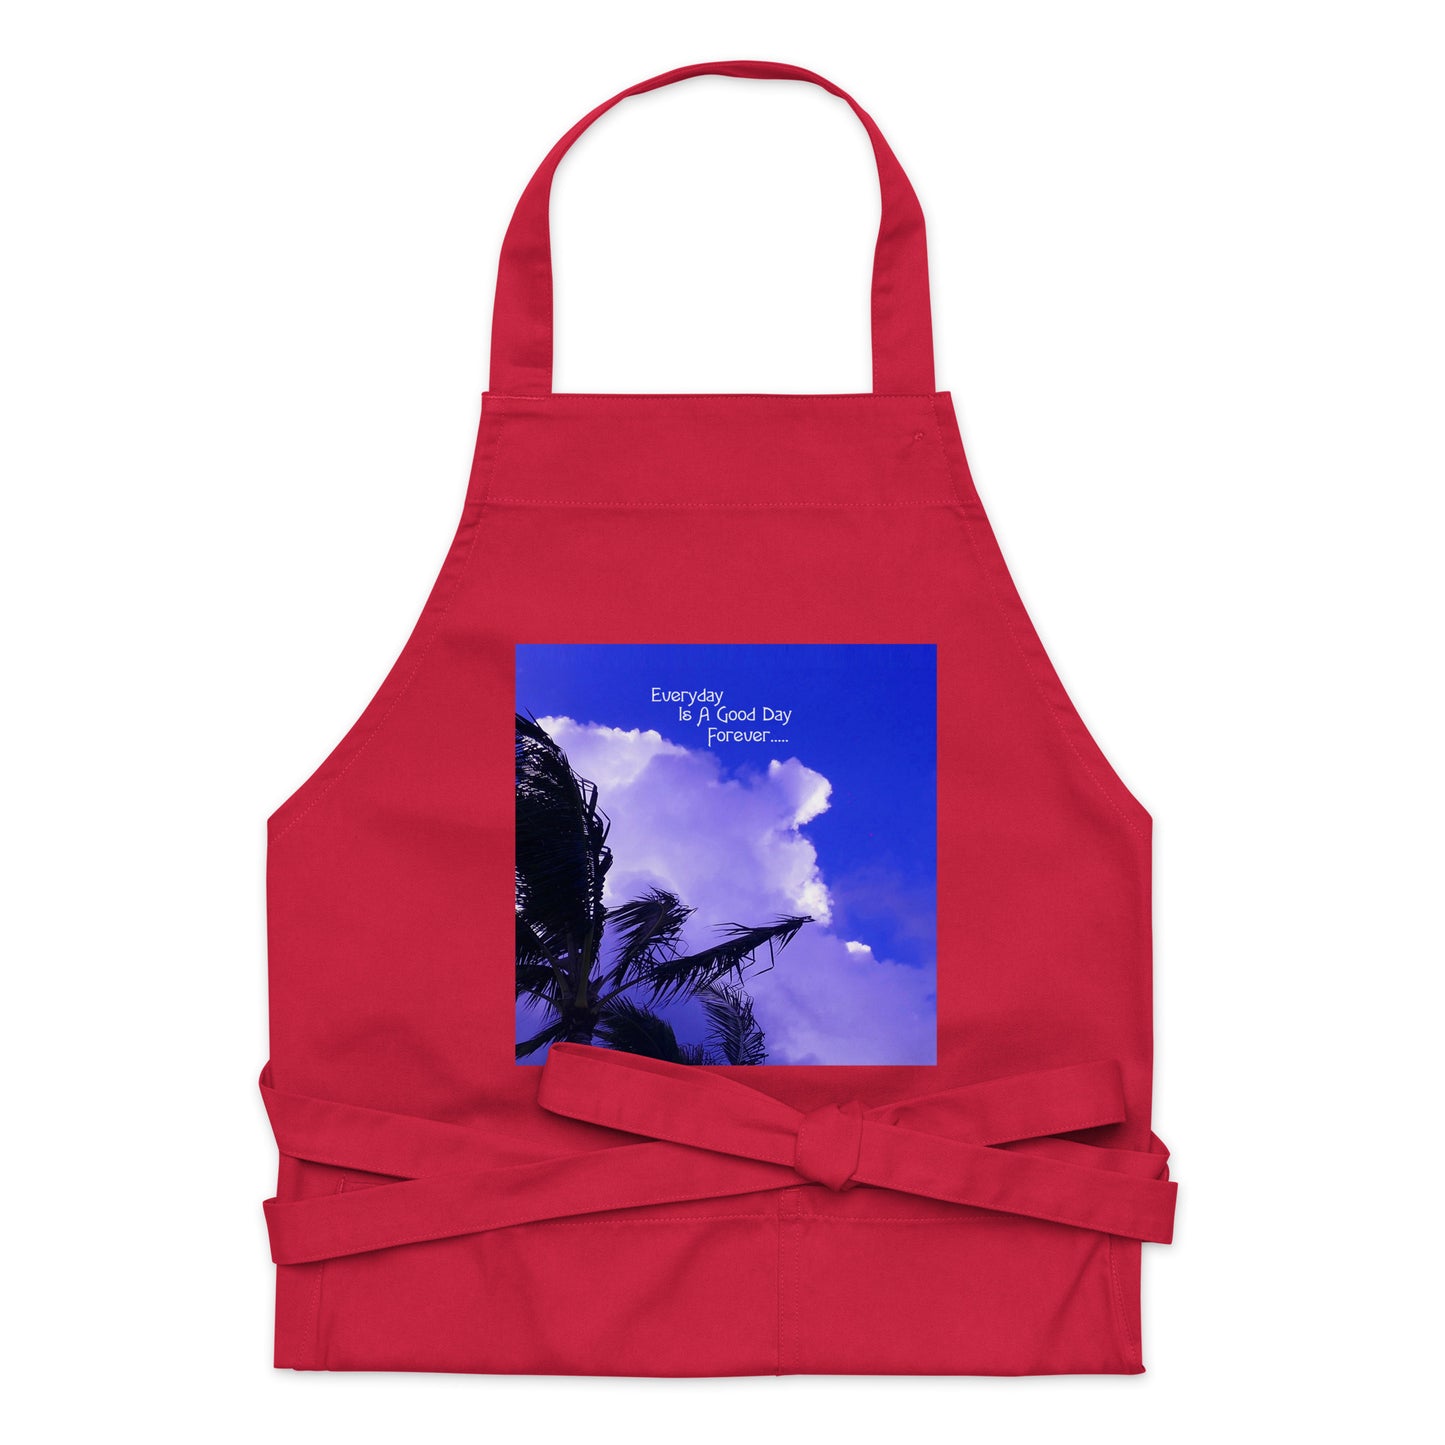 Every Day Is a Good Day Forever - Organic cotton apron - Fry1Productions